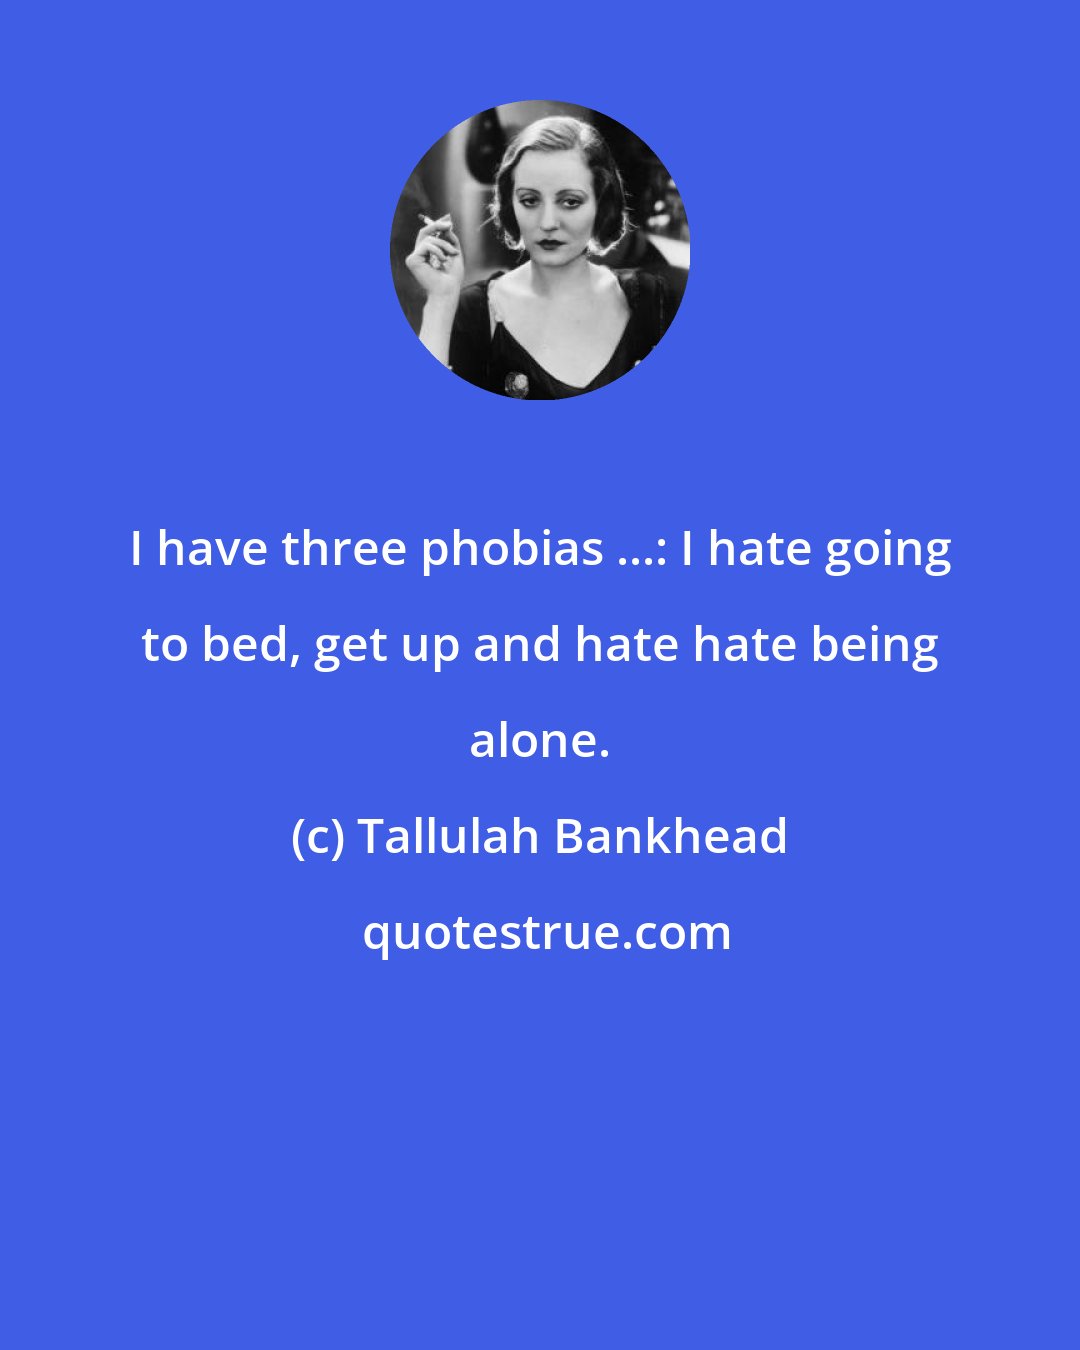 Tallulah Bankhead: I have three phobias ...: I hate going to bed, get up and hate hate being alone.